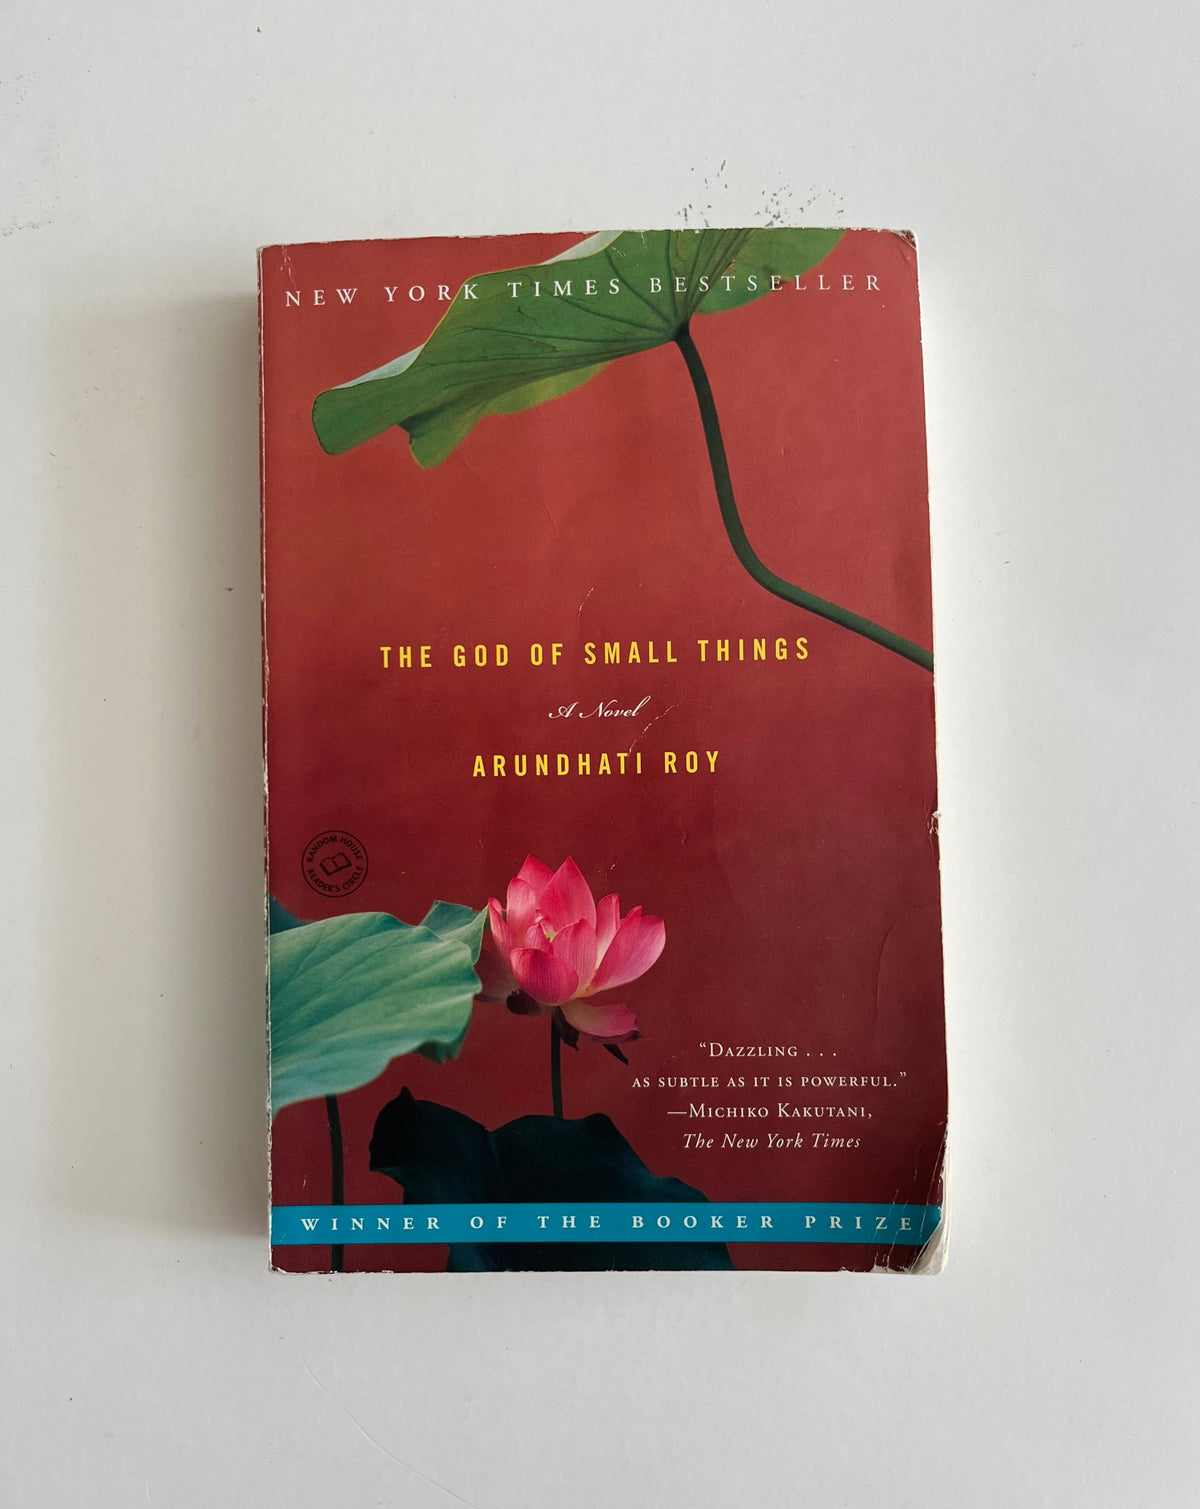 DONATE: The God of Small Things by Arundhati Roy